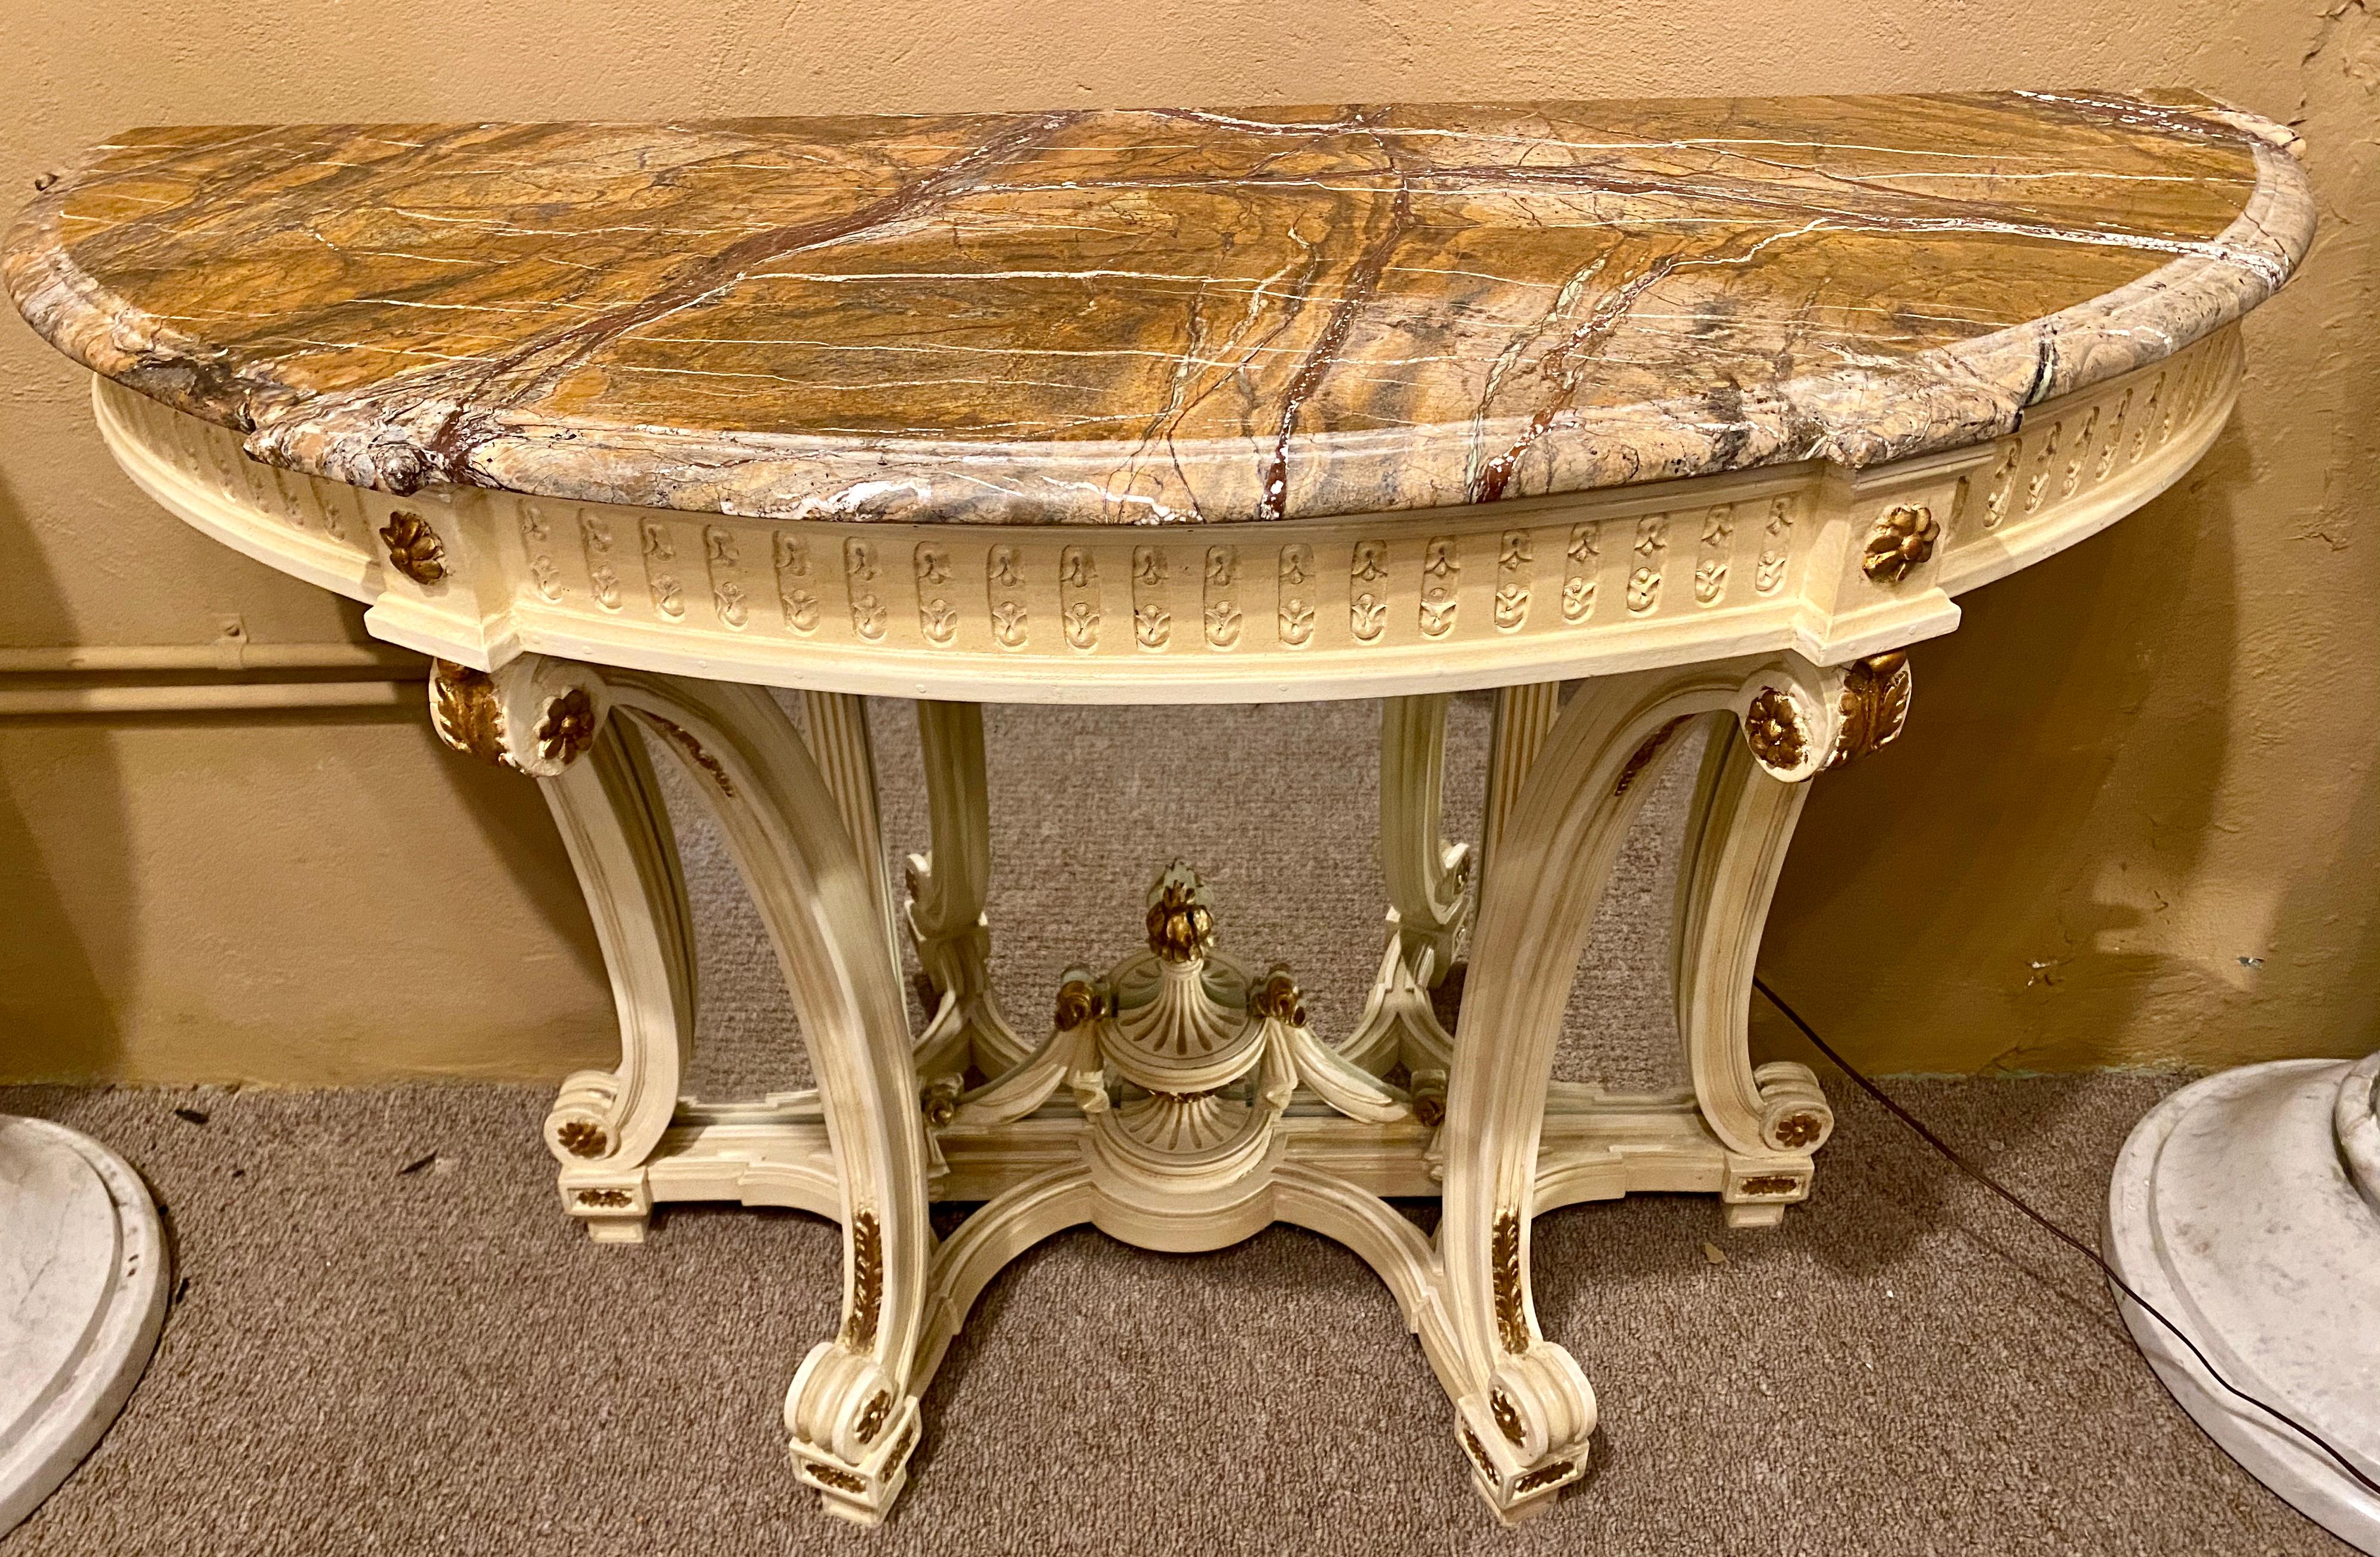 Demilune Hollywood Regency style marble-top console or serving table. A fine custom quality parcel gilt and crème paint decorated beveled mirror back console, serving or sofa table. With sprayed legs and a carved undercarriage. Beveled mirror three